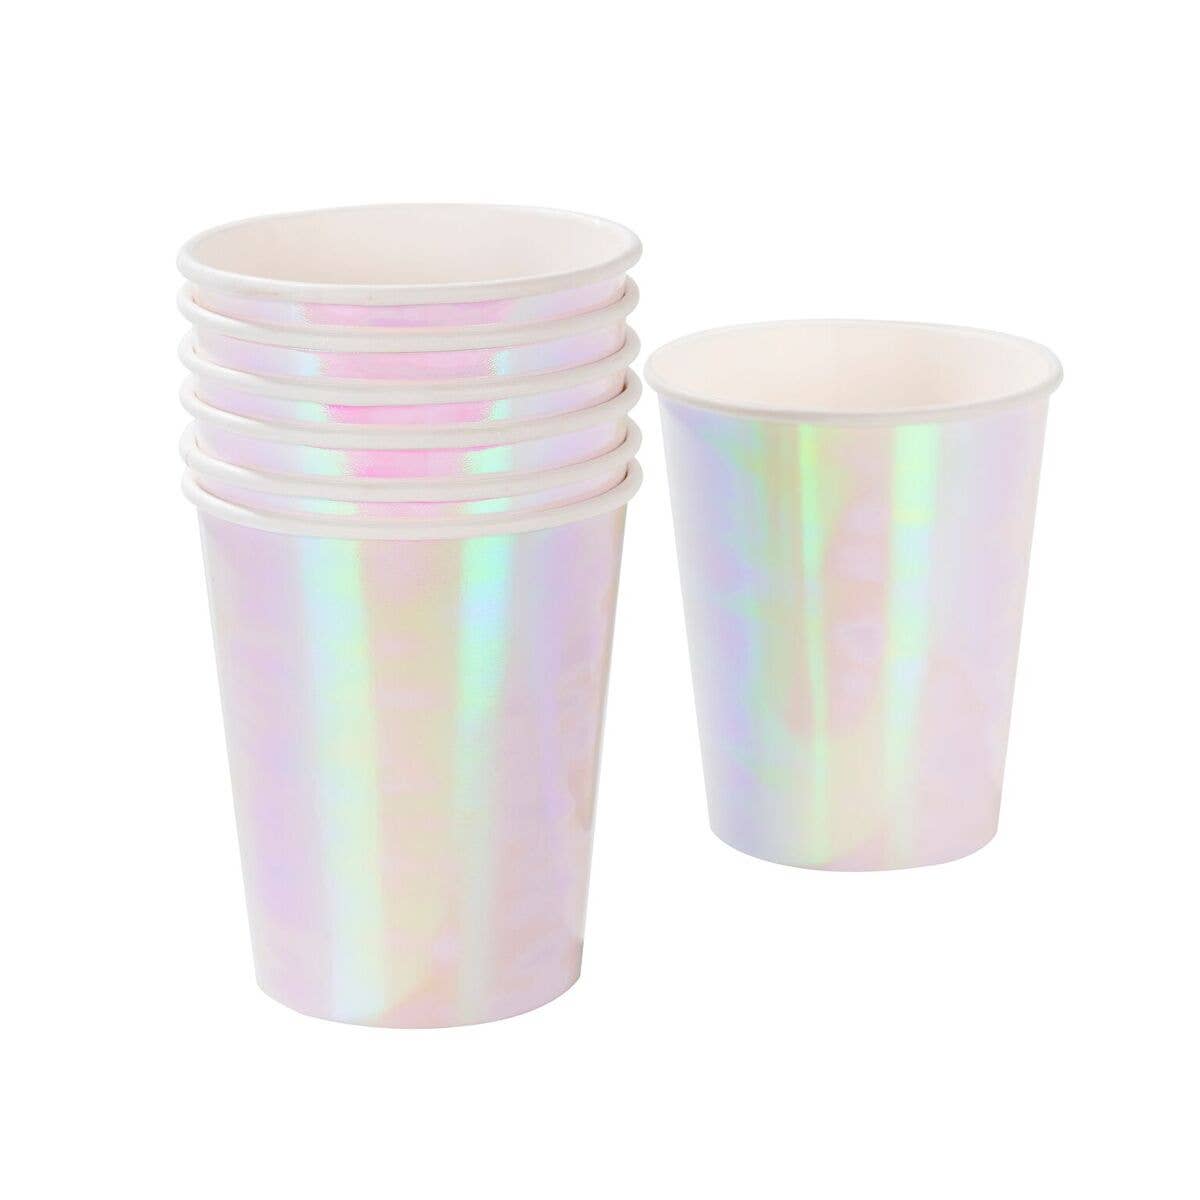 We Heart Pastel Iridescent Paper Cups - 12 Pack by Talking Tables. Unicorn Party Paper Cups. Mermaid Party Disposable Cups. Decor for Bachelorette Party. Wedding Decor